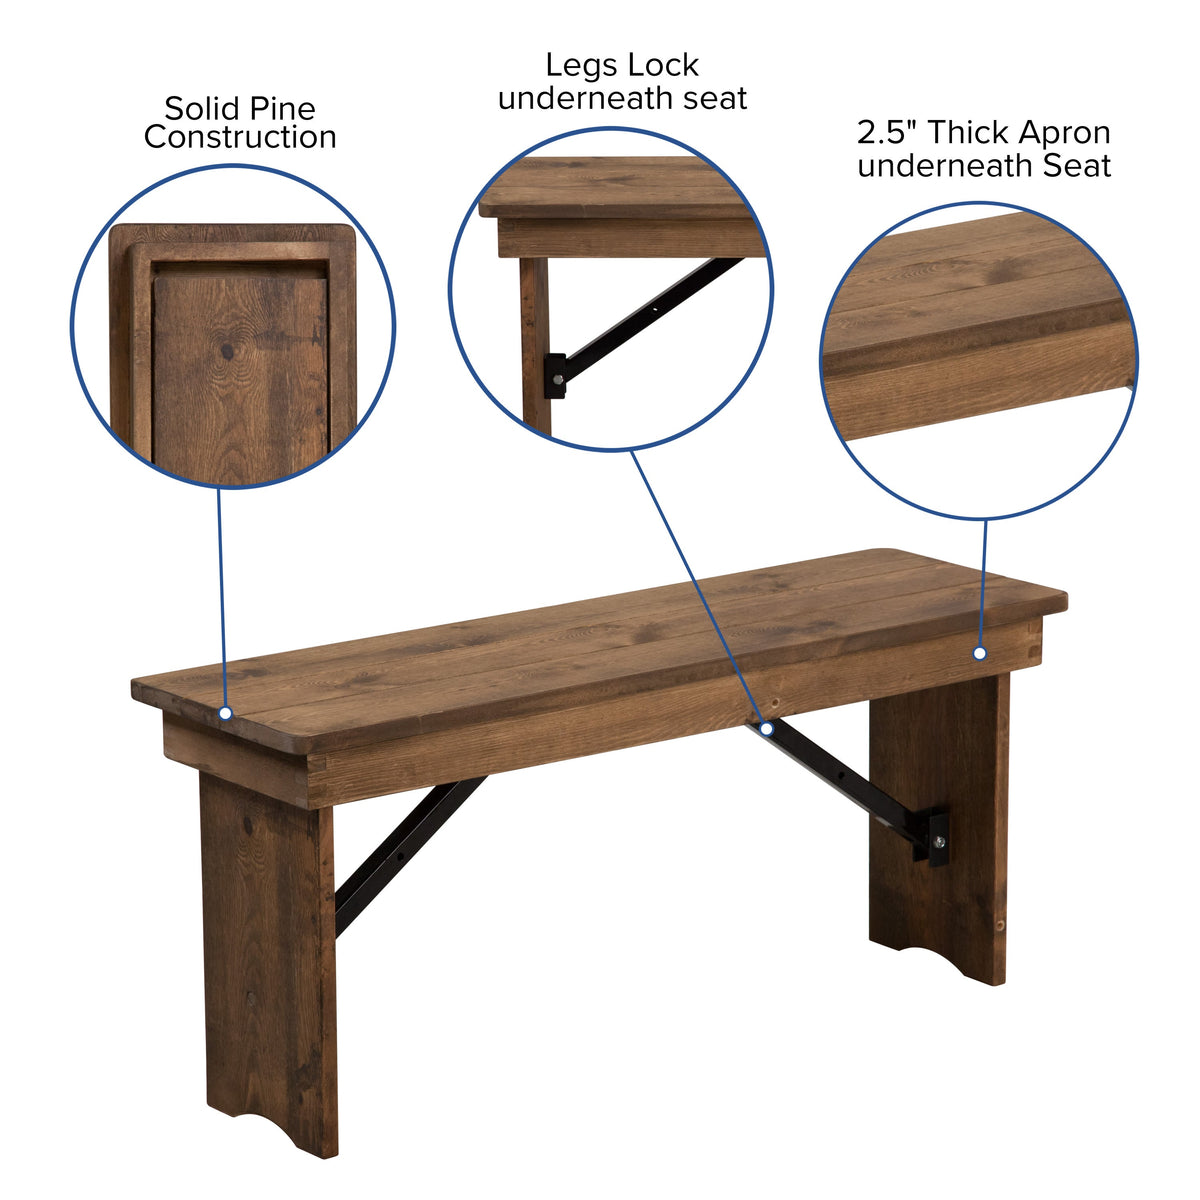 Antique Rustic |#| 8' x 40inch Antique Rustic Folding Farm Table and Four Bench Set